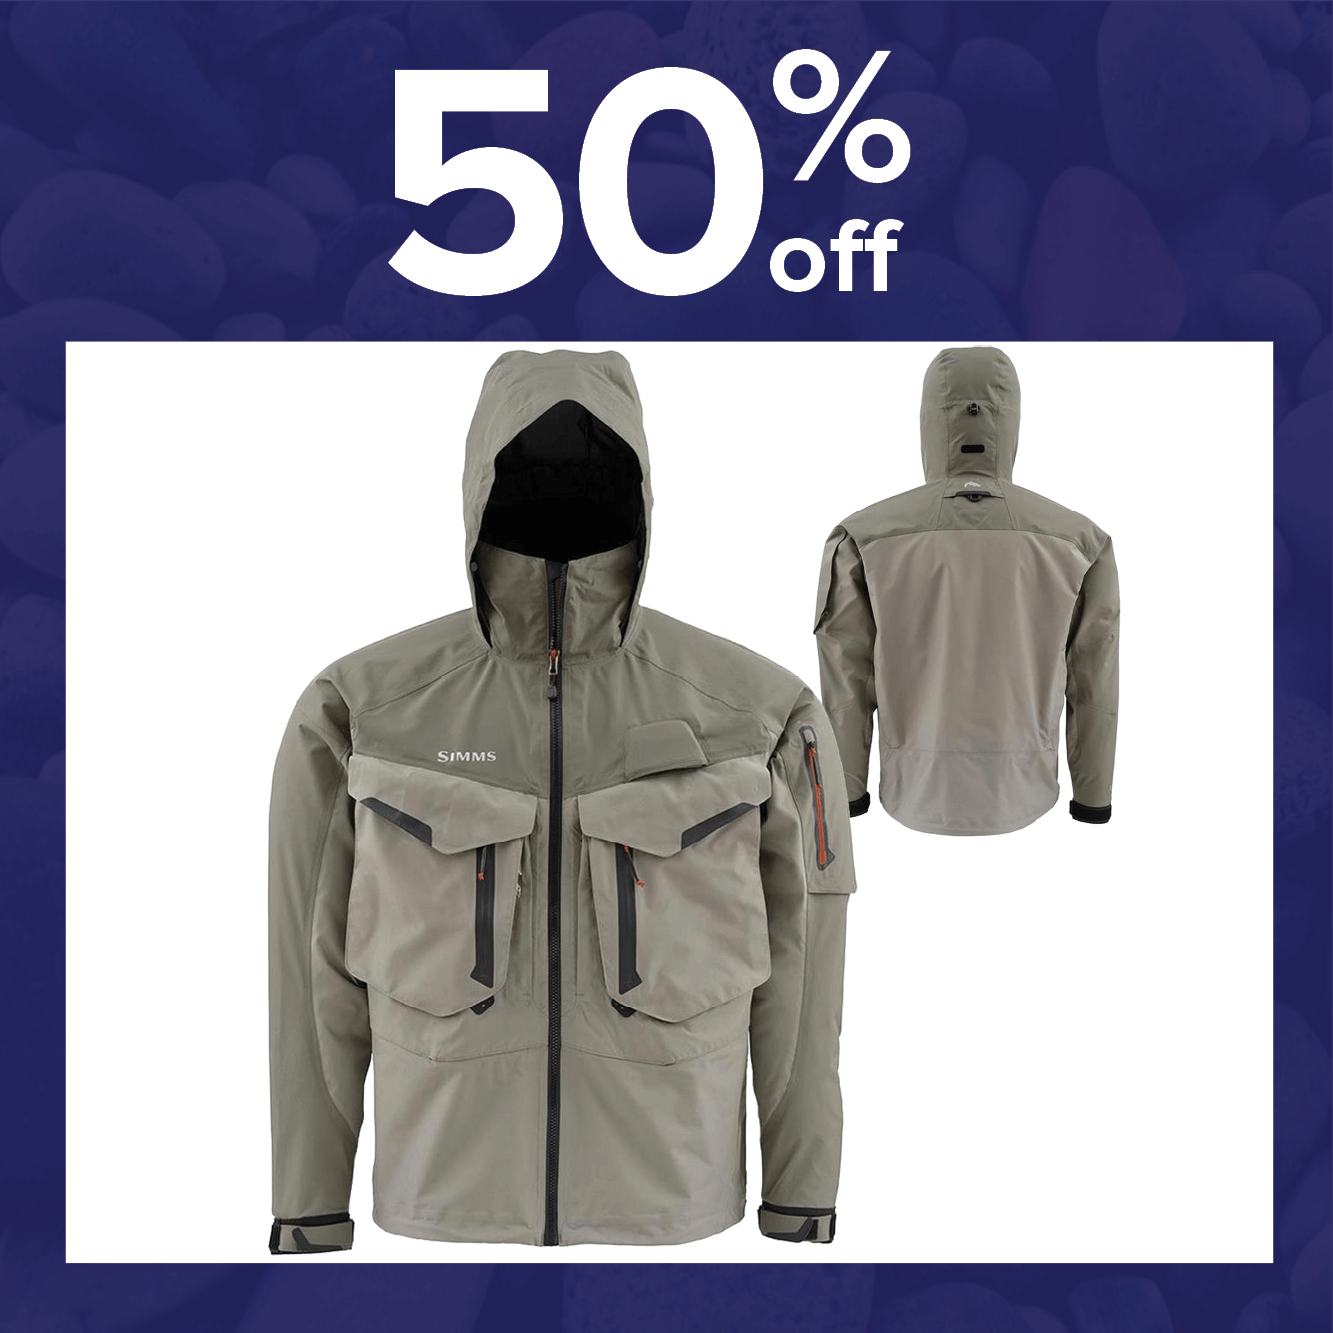 50% off the Simms G4 Pro Jacket